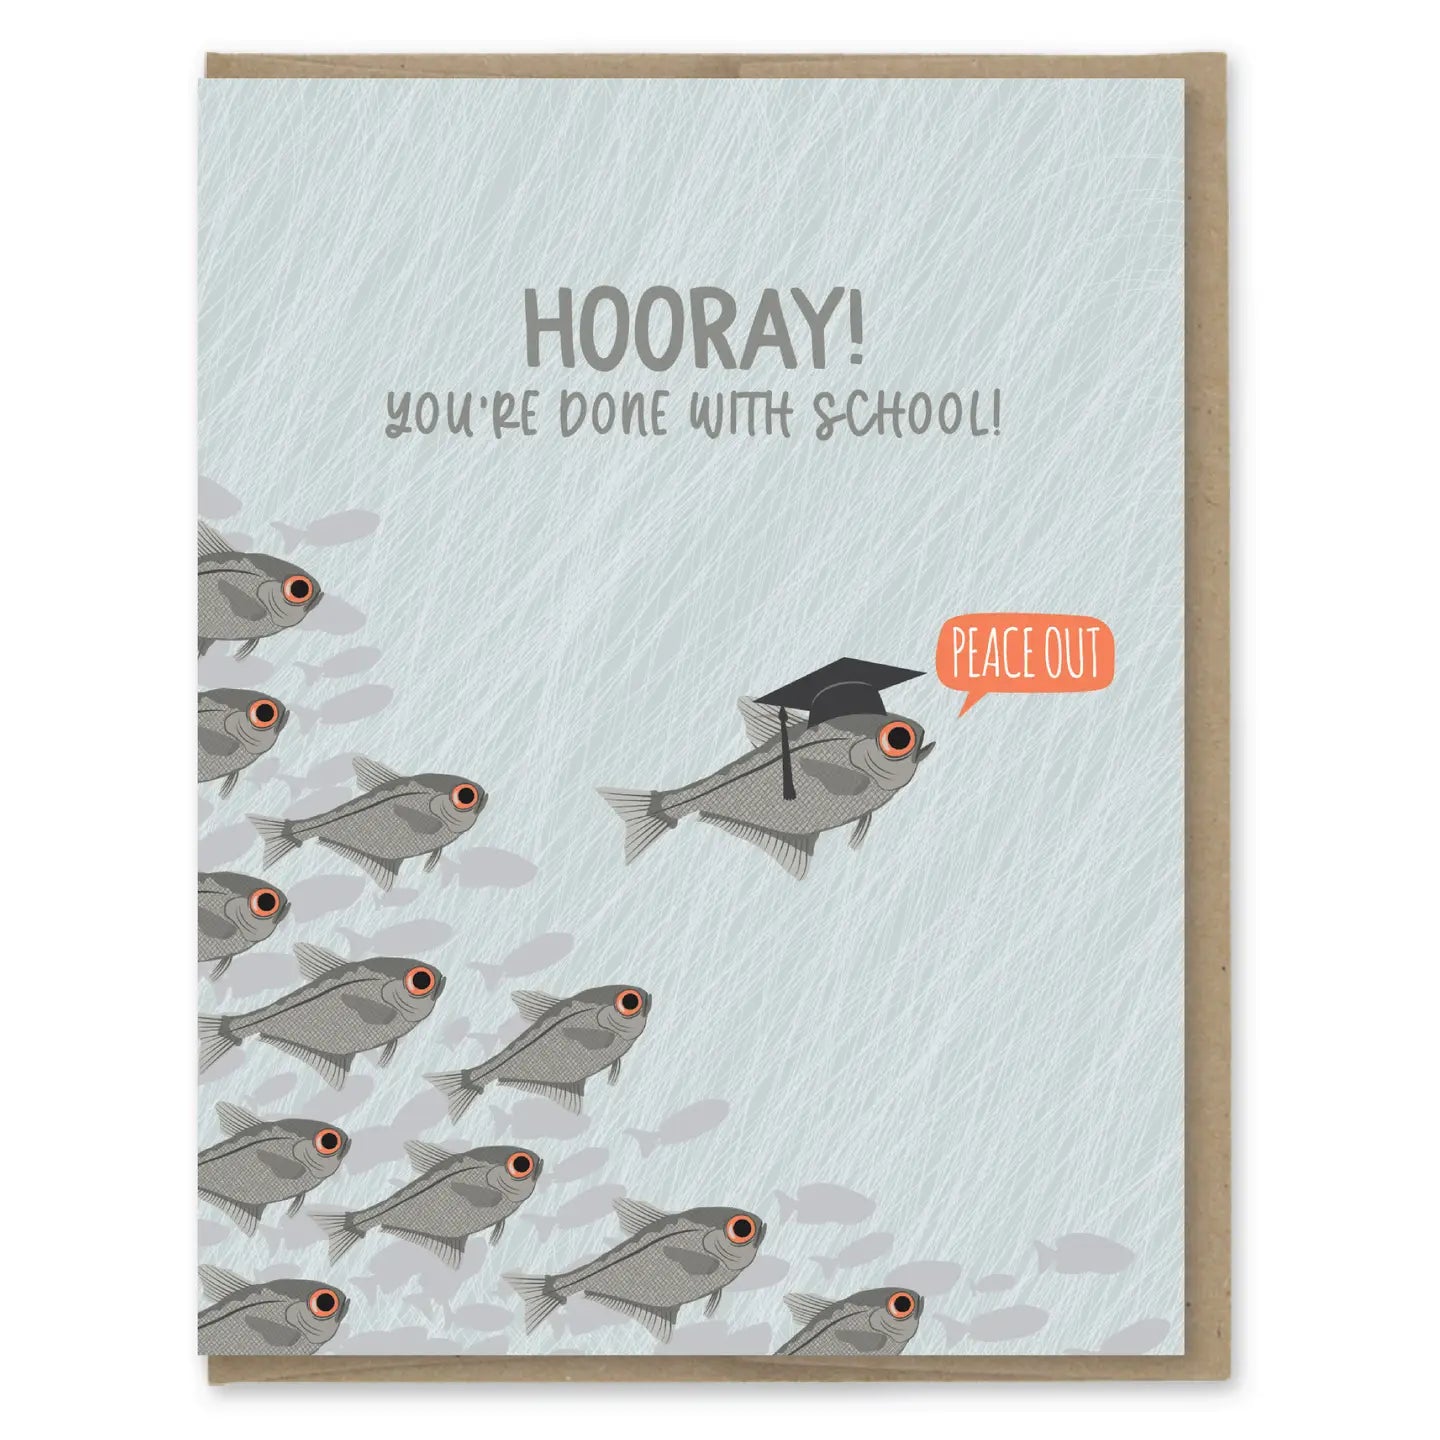 Modern Printed Matter “Hooray You’re Done With School!” Card